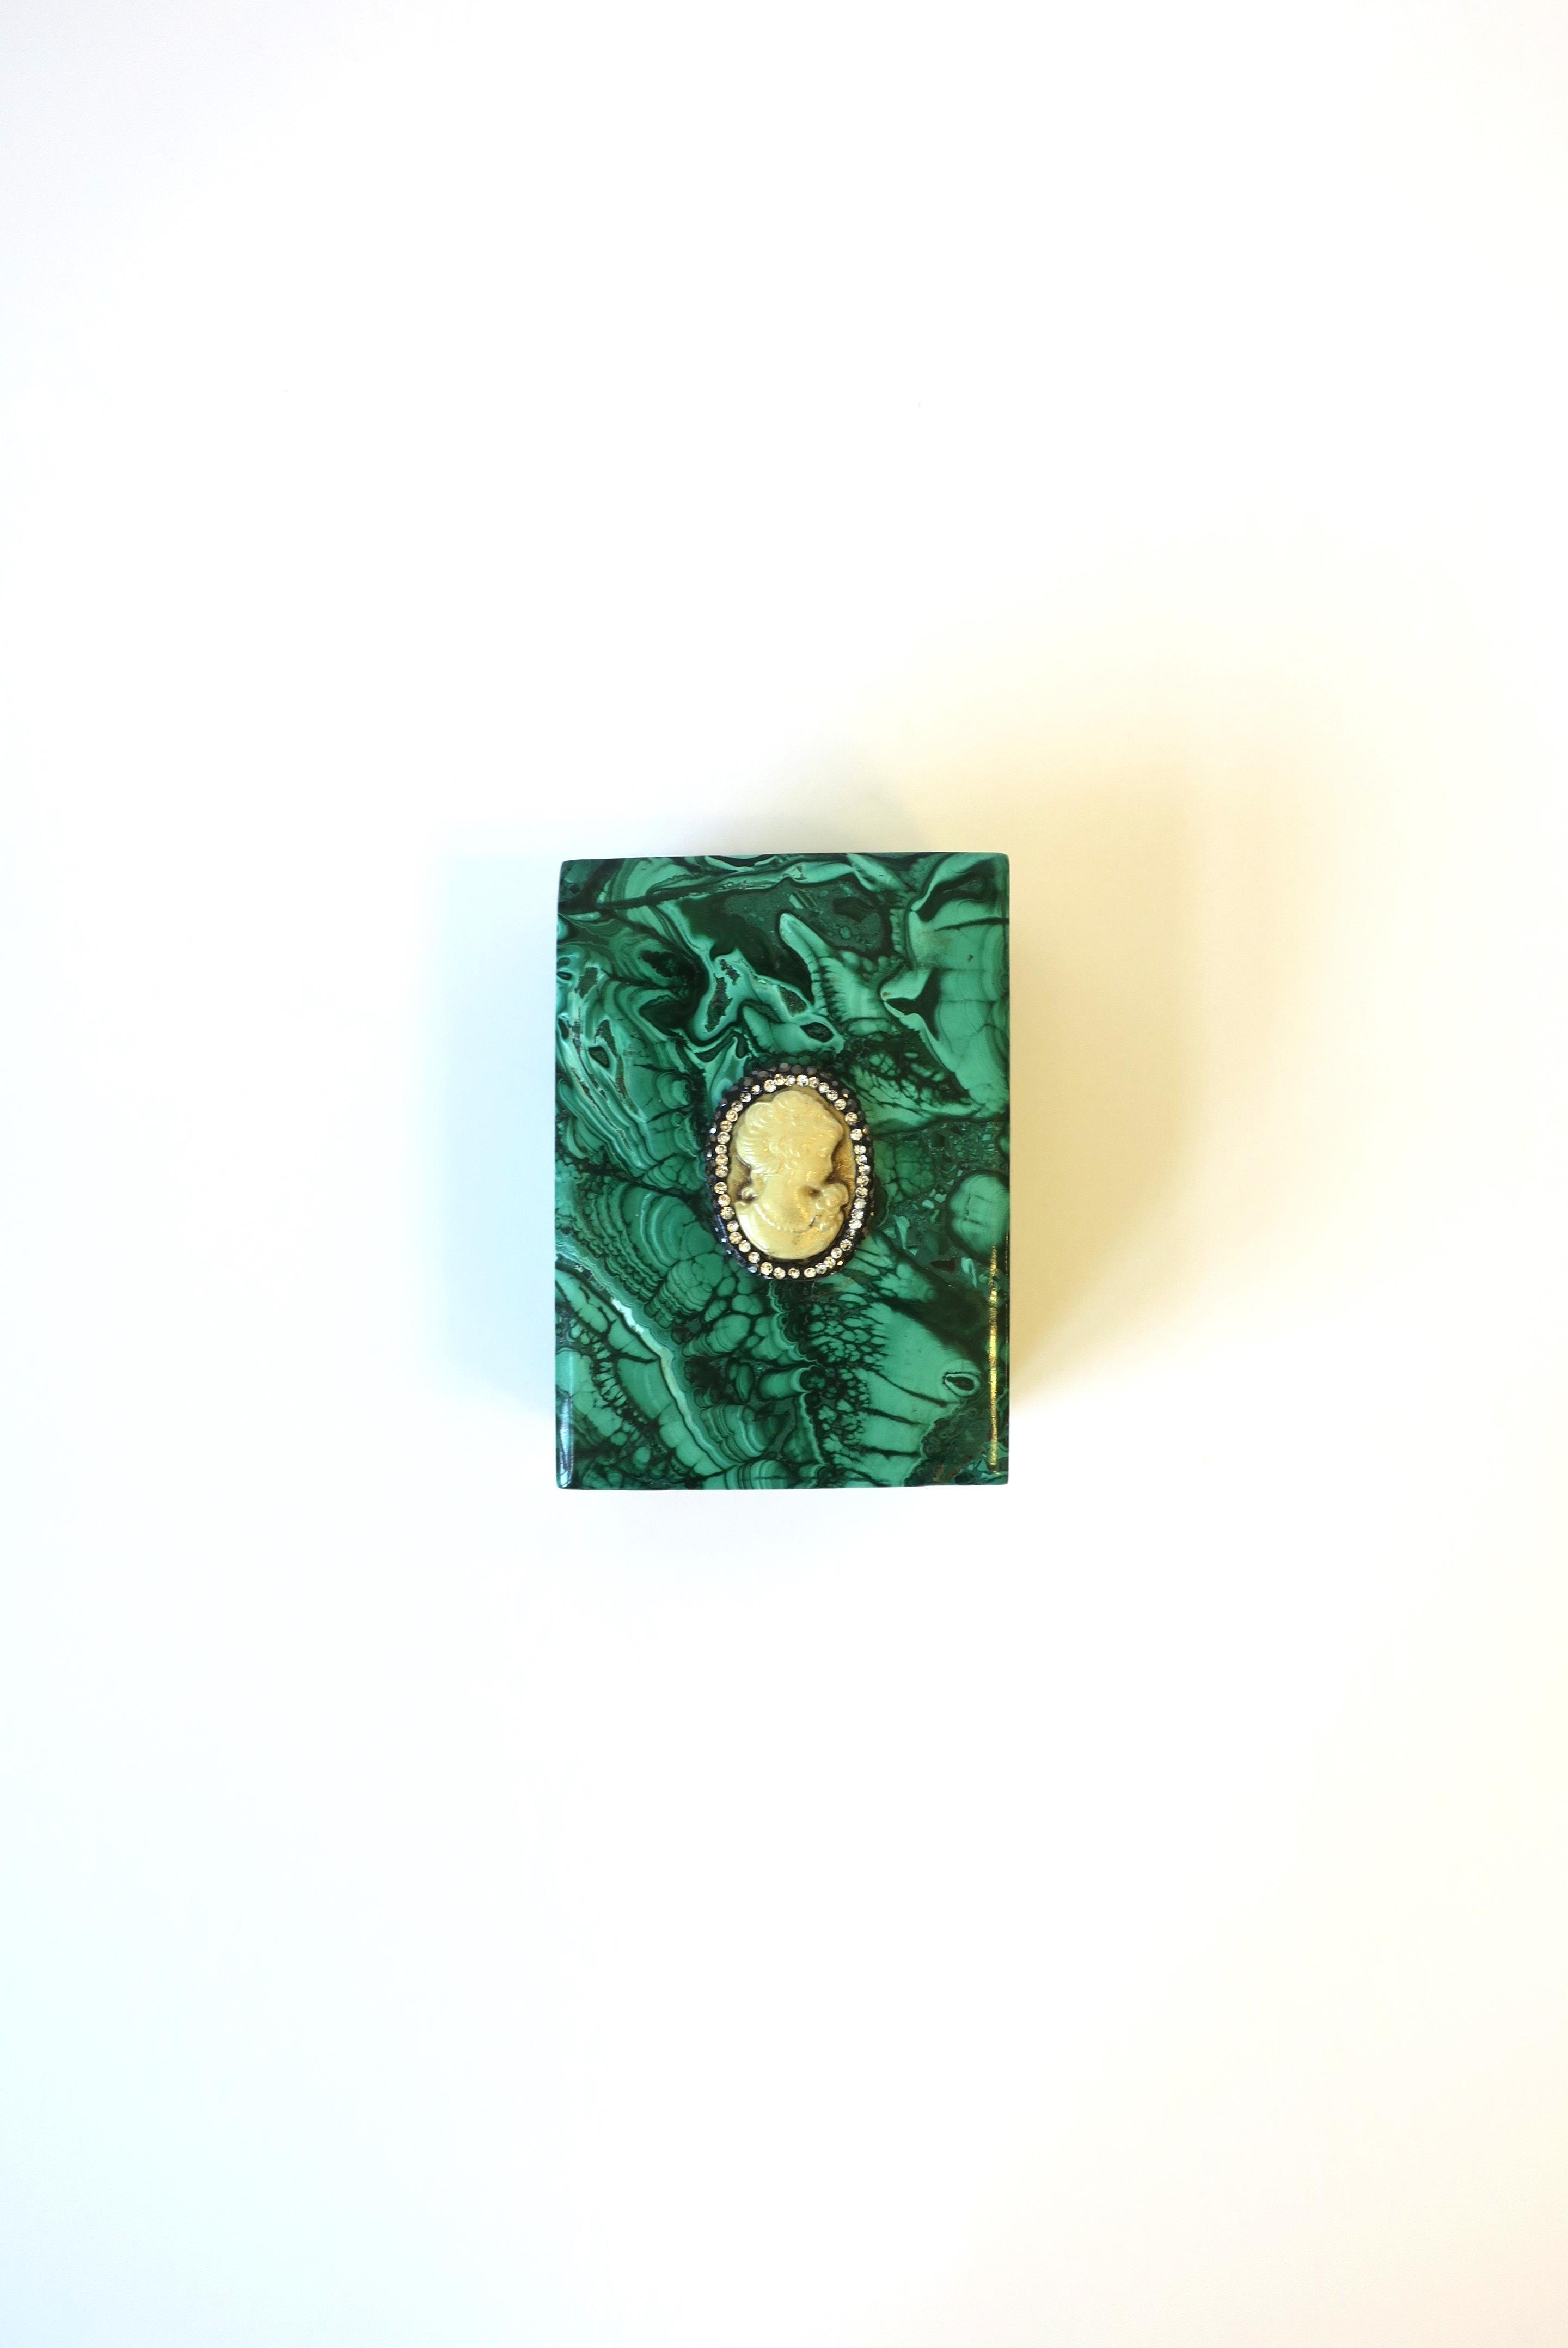 A beautiful and substantial green Malachite decorative or jewelry box, circa late-20th century. Box is rectangular in shape with resin female cameo detail on top lid. Piece is beautifully hand-crafted. Piece makes a great decorative or storage